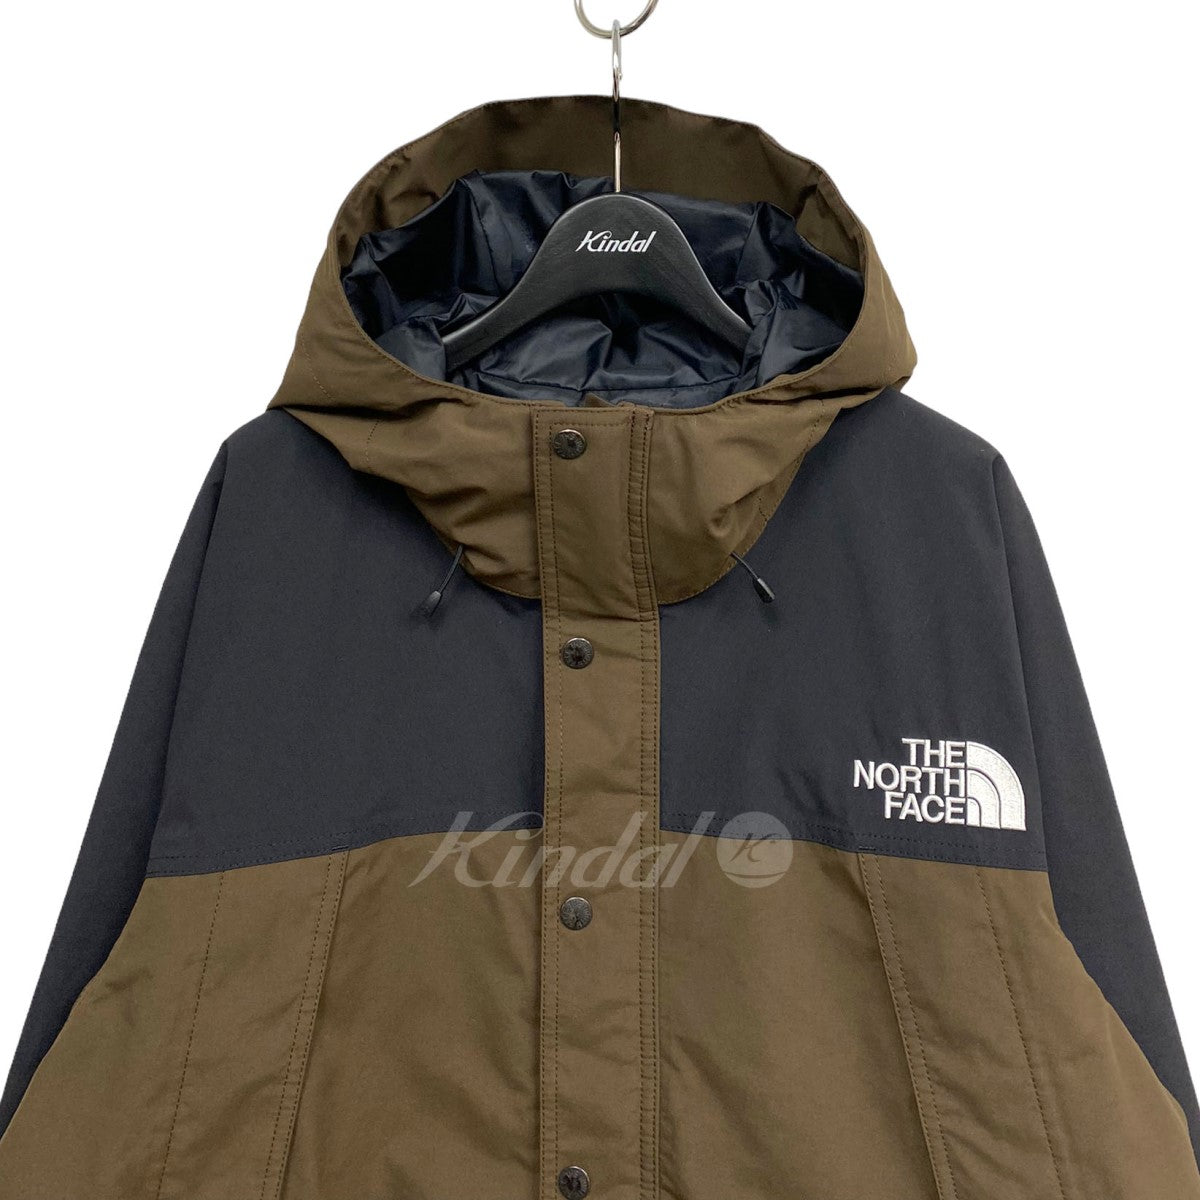 THE NORTH FACE(ザノースフェイス) 23AW Mountain Light Jacket ...